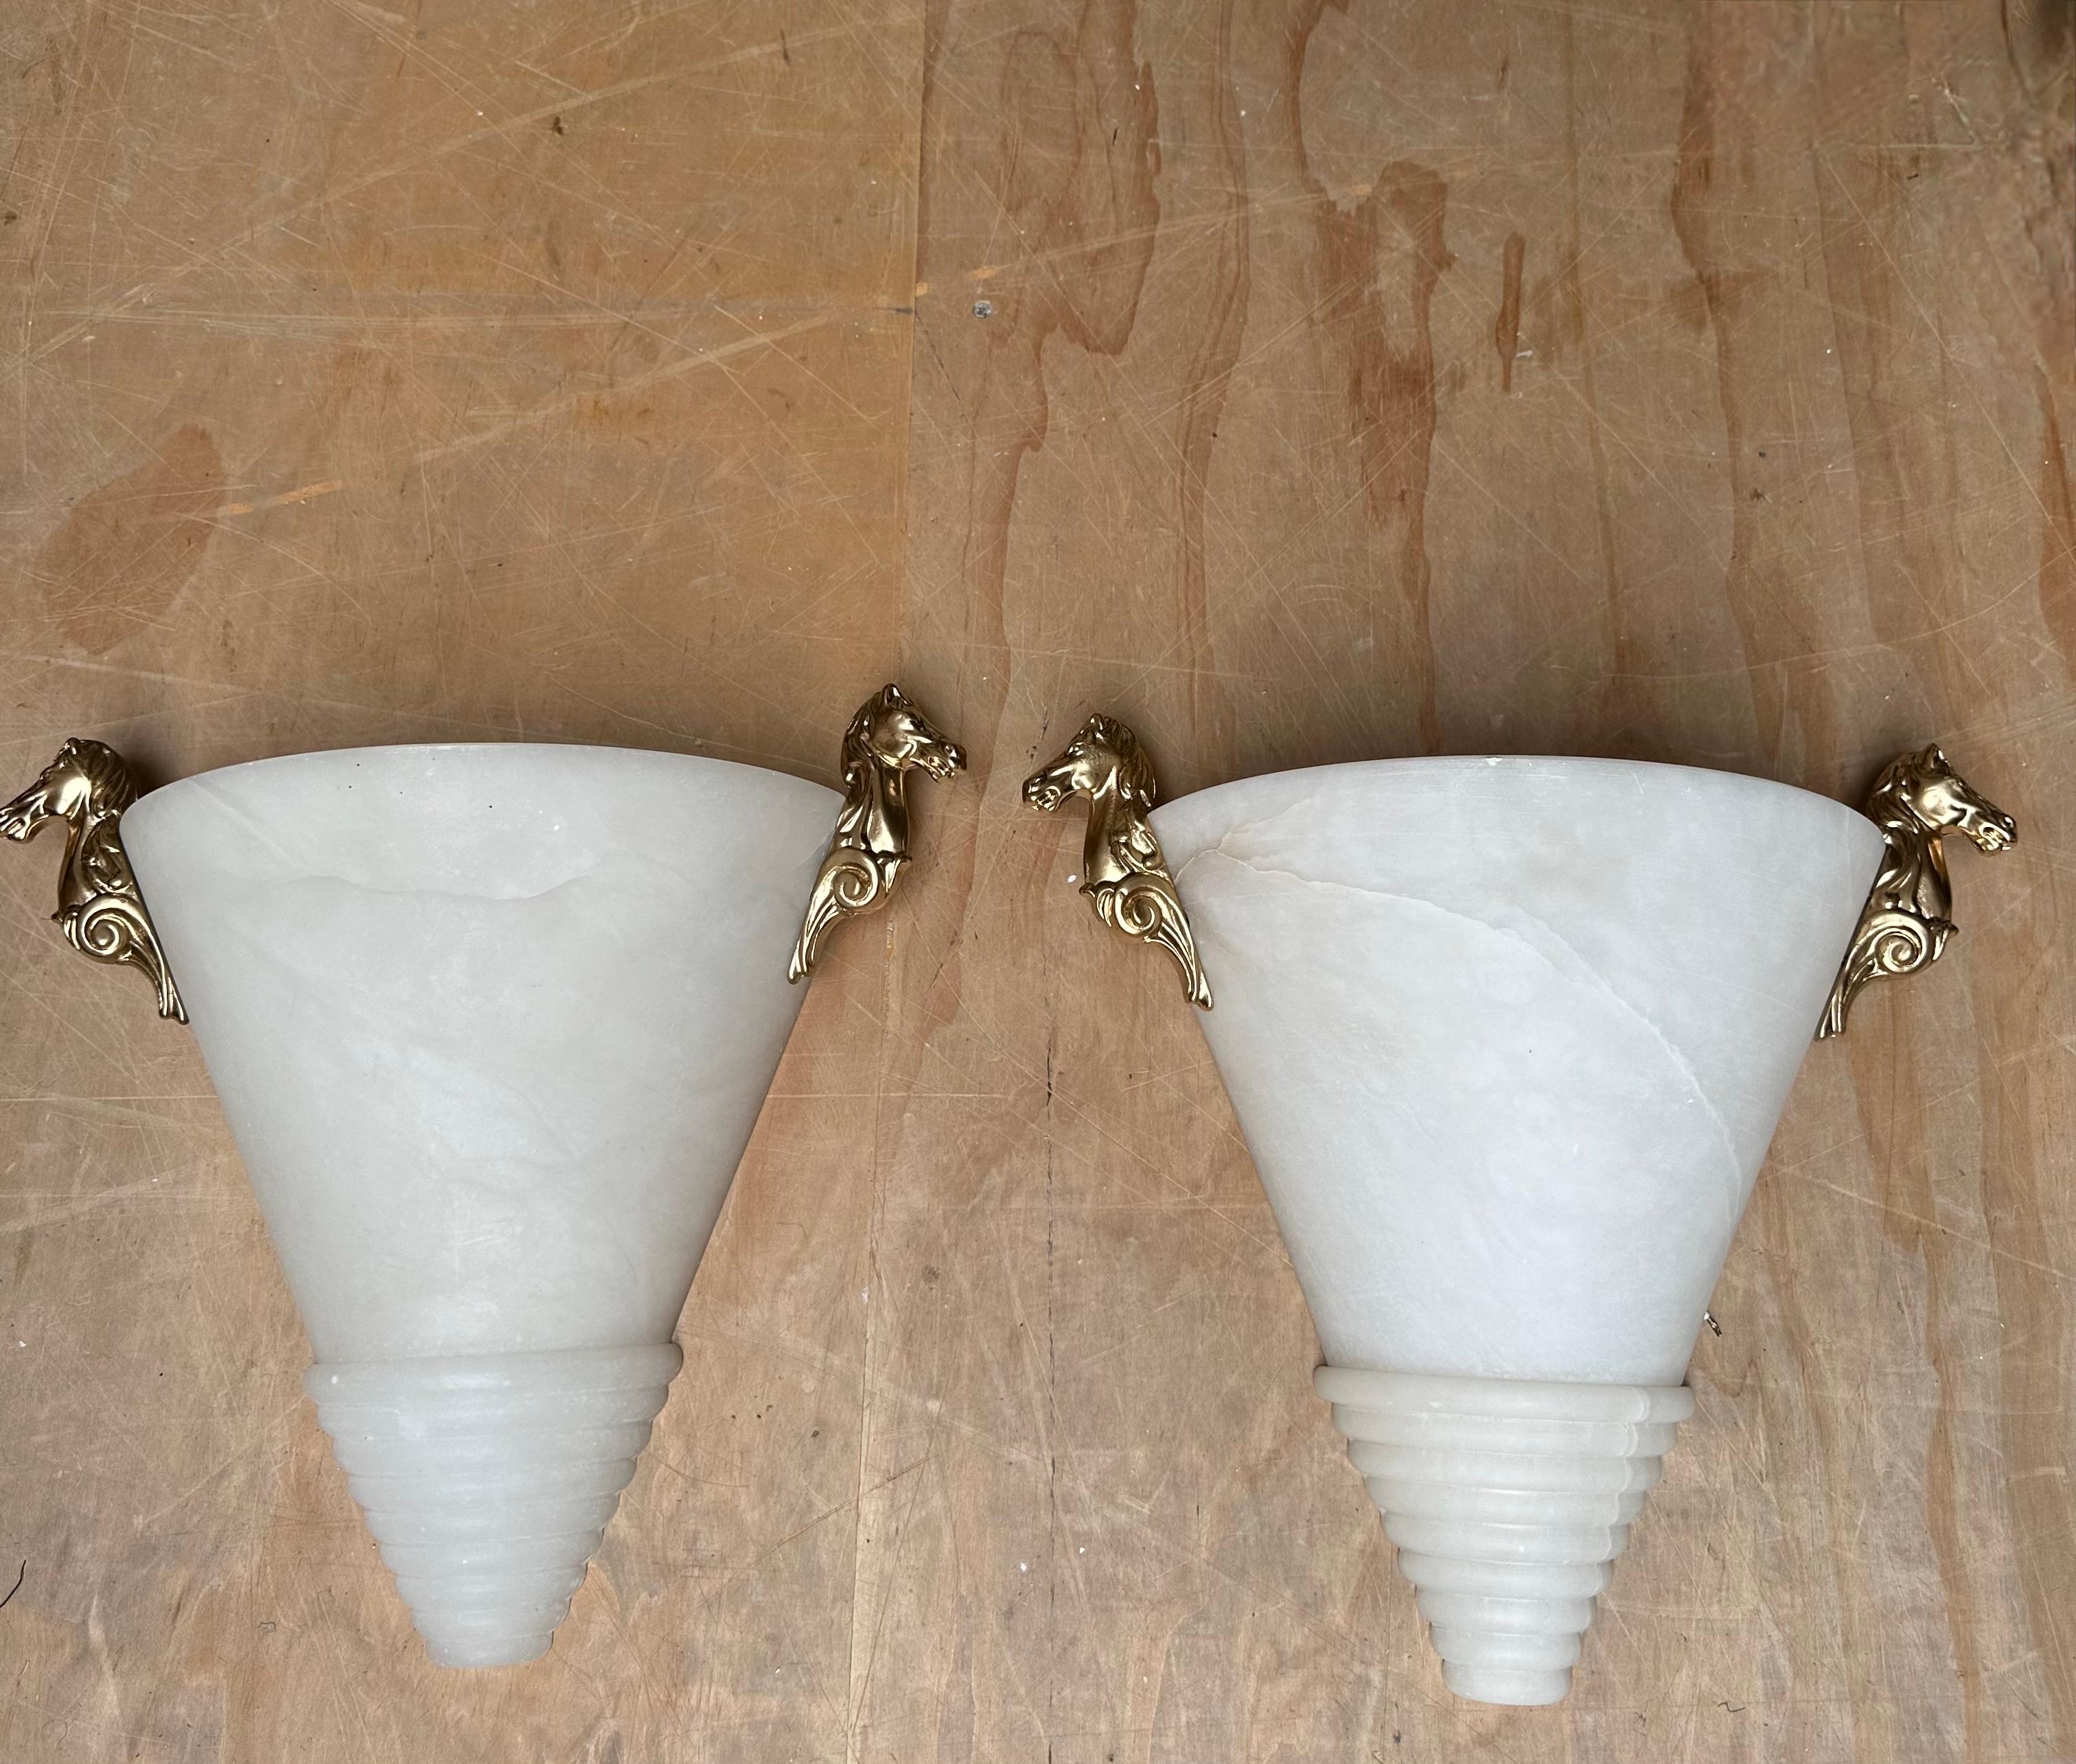 Midcentury Modern Italy Pair Art Deco Style Alabaster Sconces w Horse Sculptures For Sale 12